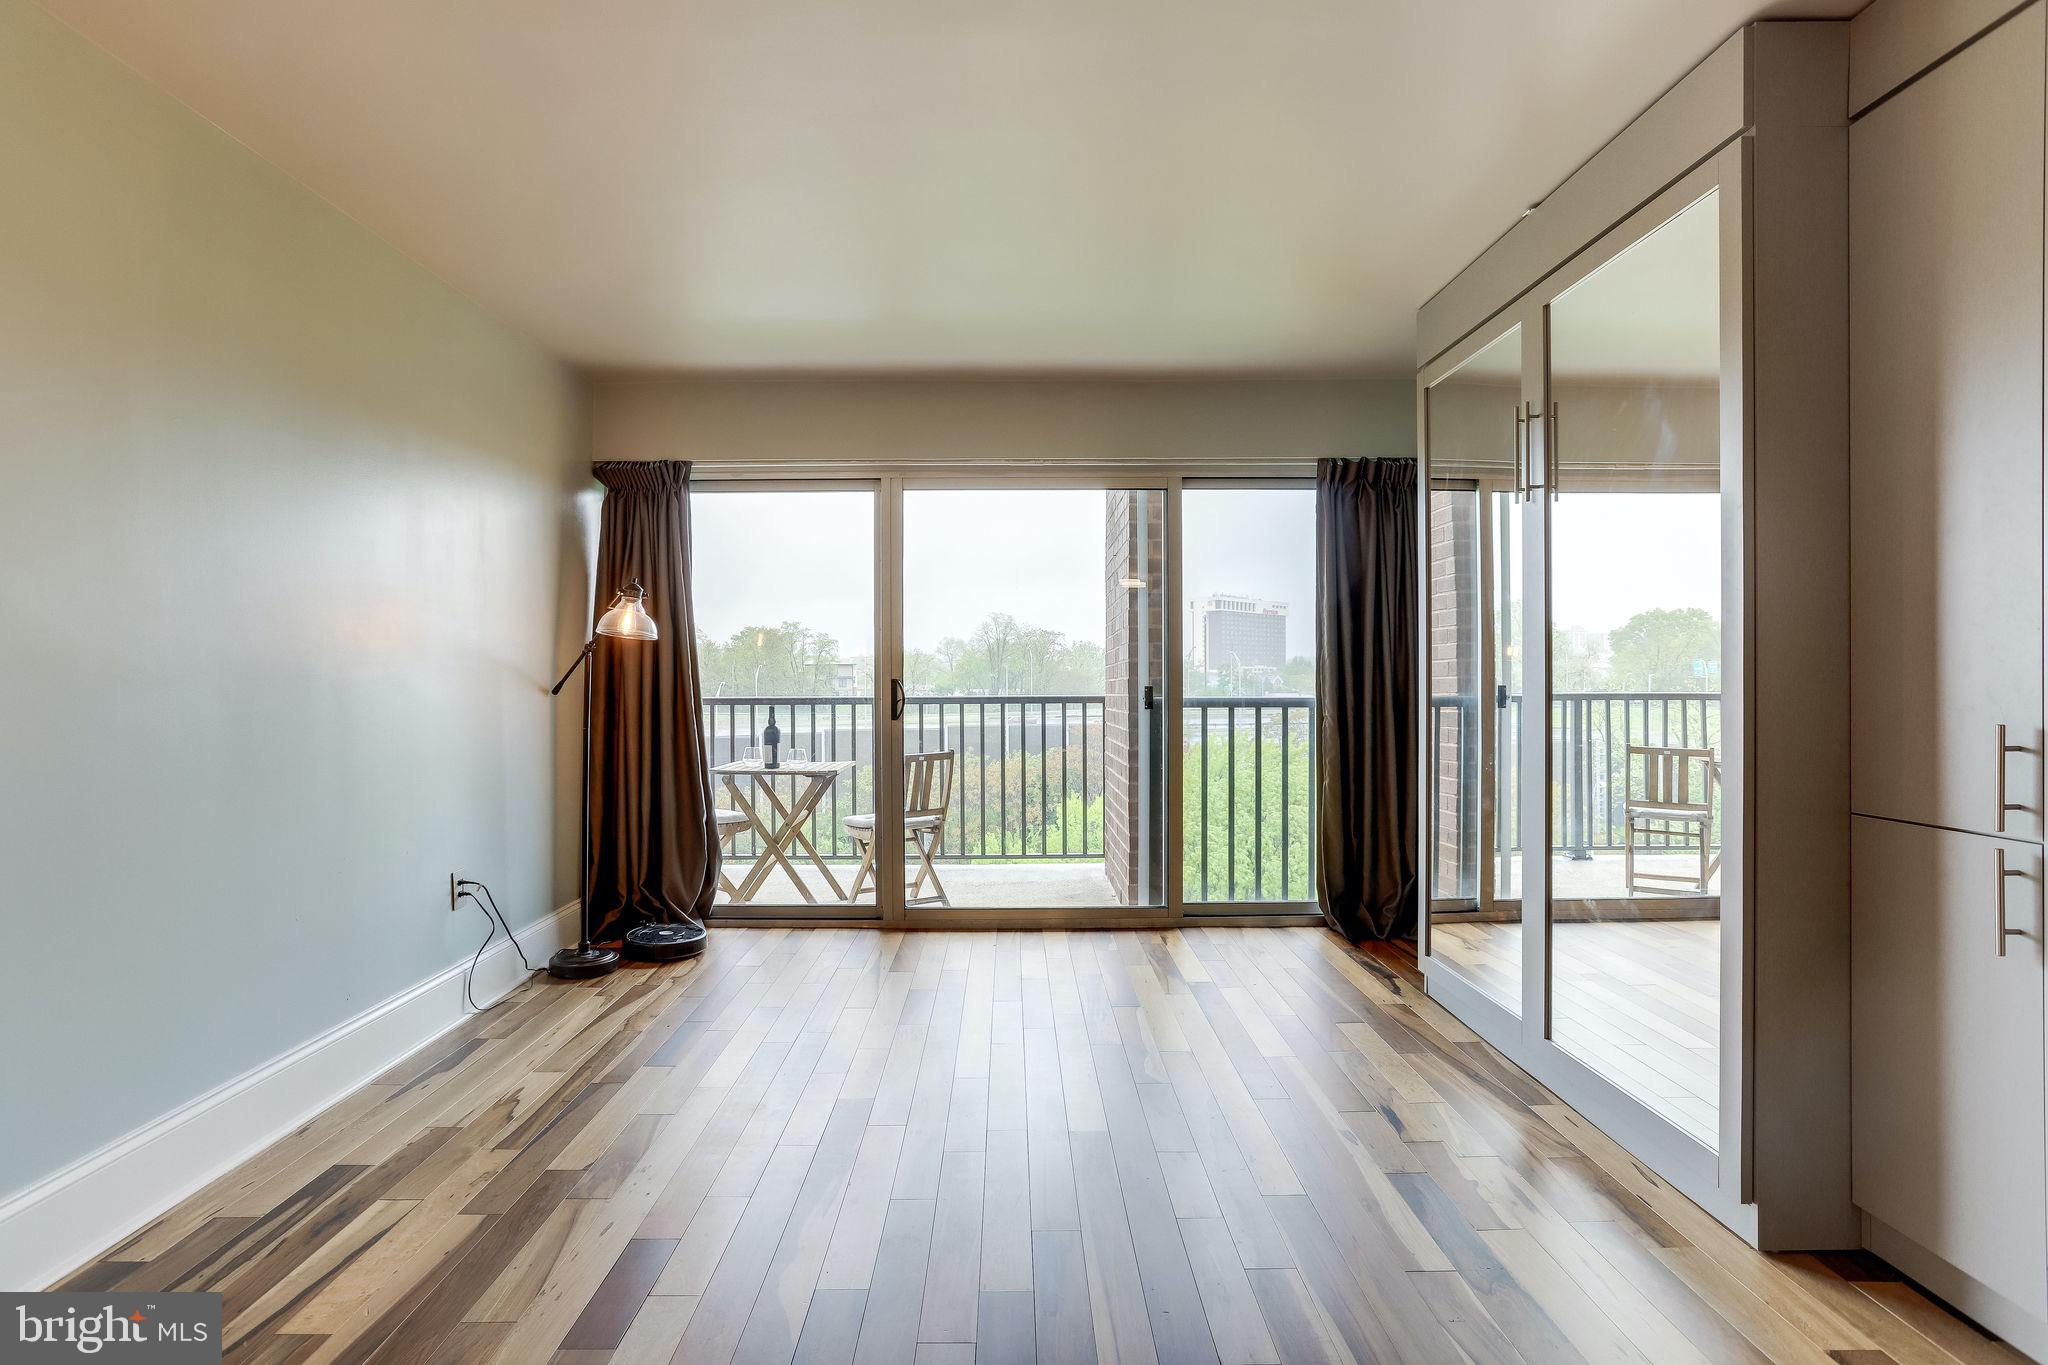 a view of a room with wooden floor and city view